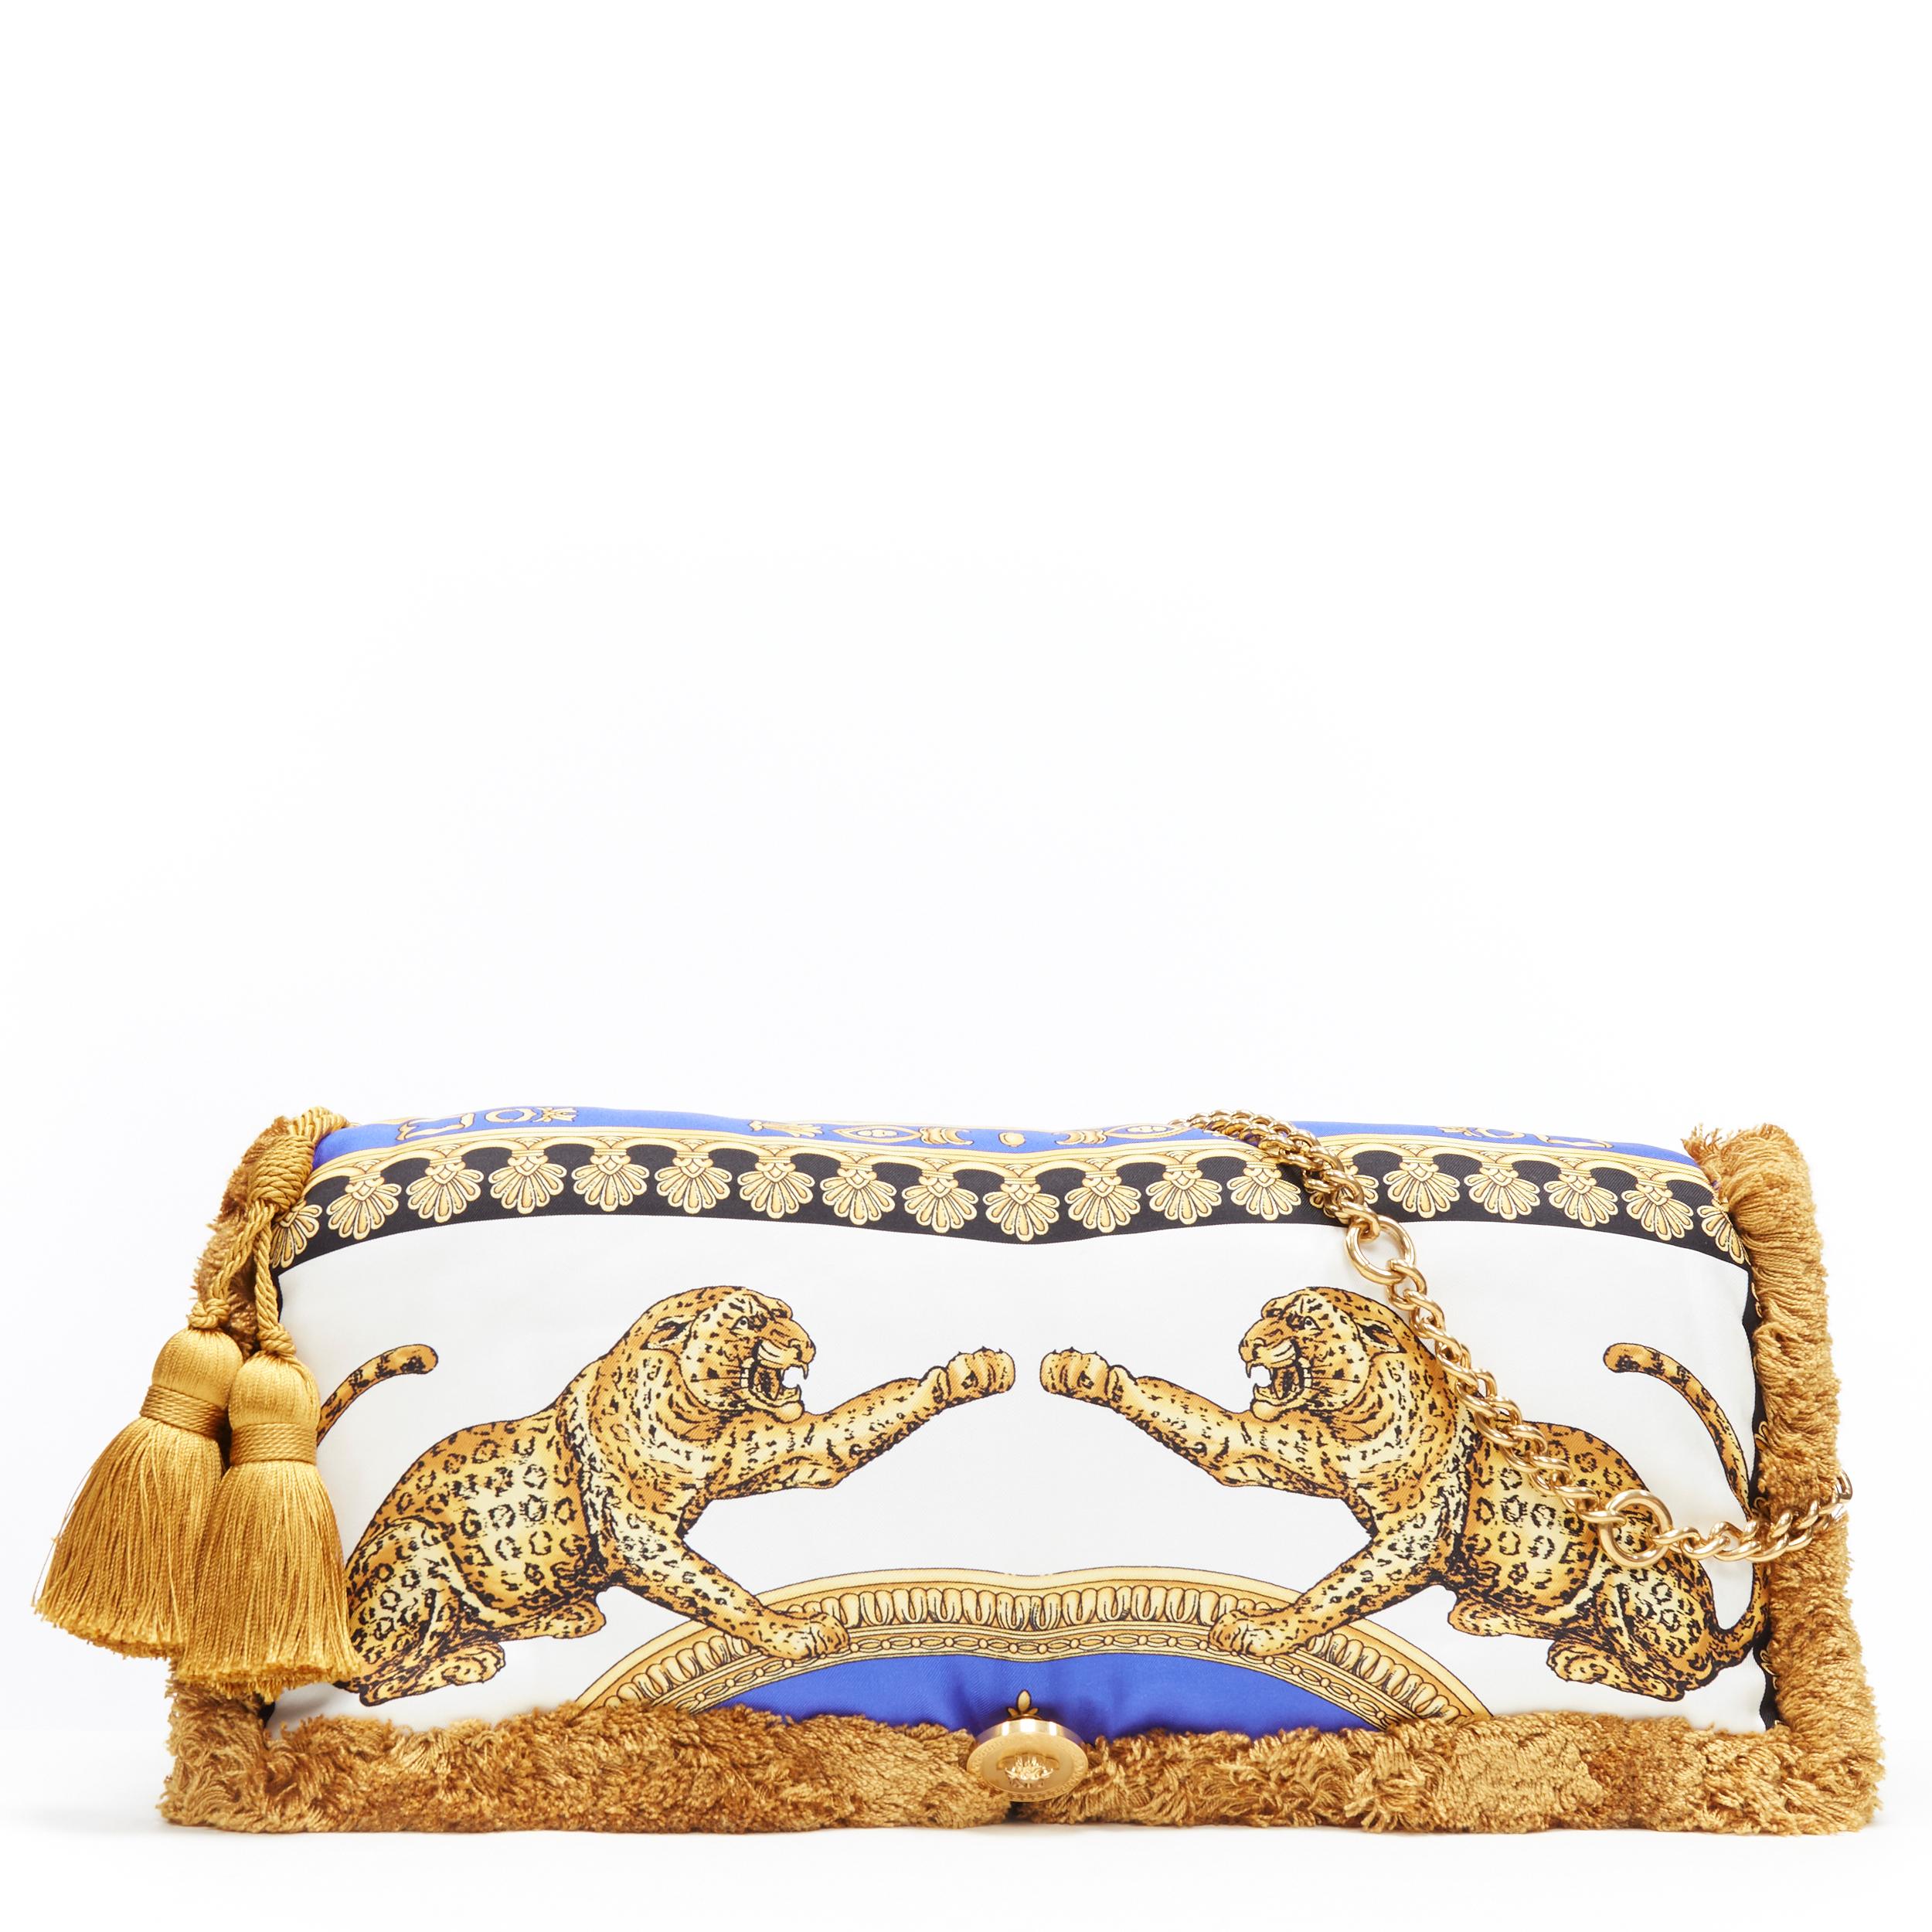 new VERSACE 2018 Runway Pillow Talk baroque leopard silk tassel shoulder bag
Brand: Versace
Designer: Donatella Versace
Collection: Pre Fall 2018
Model Name / Style: Pillow Talk
Material: Silk
Color: White; gold and blue
Pattern: Leopard
Closure: